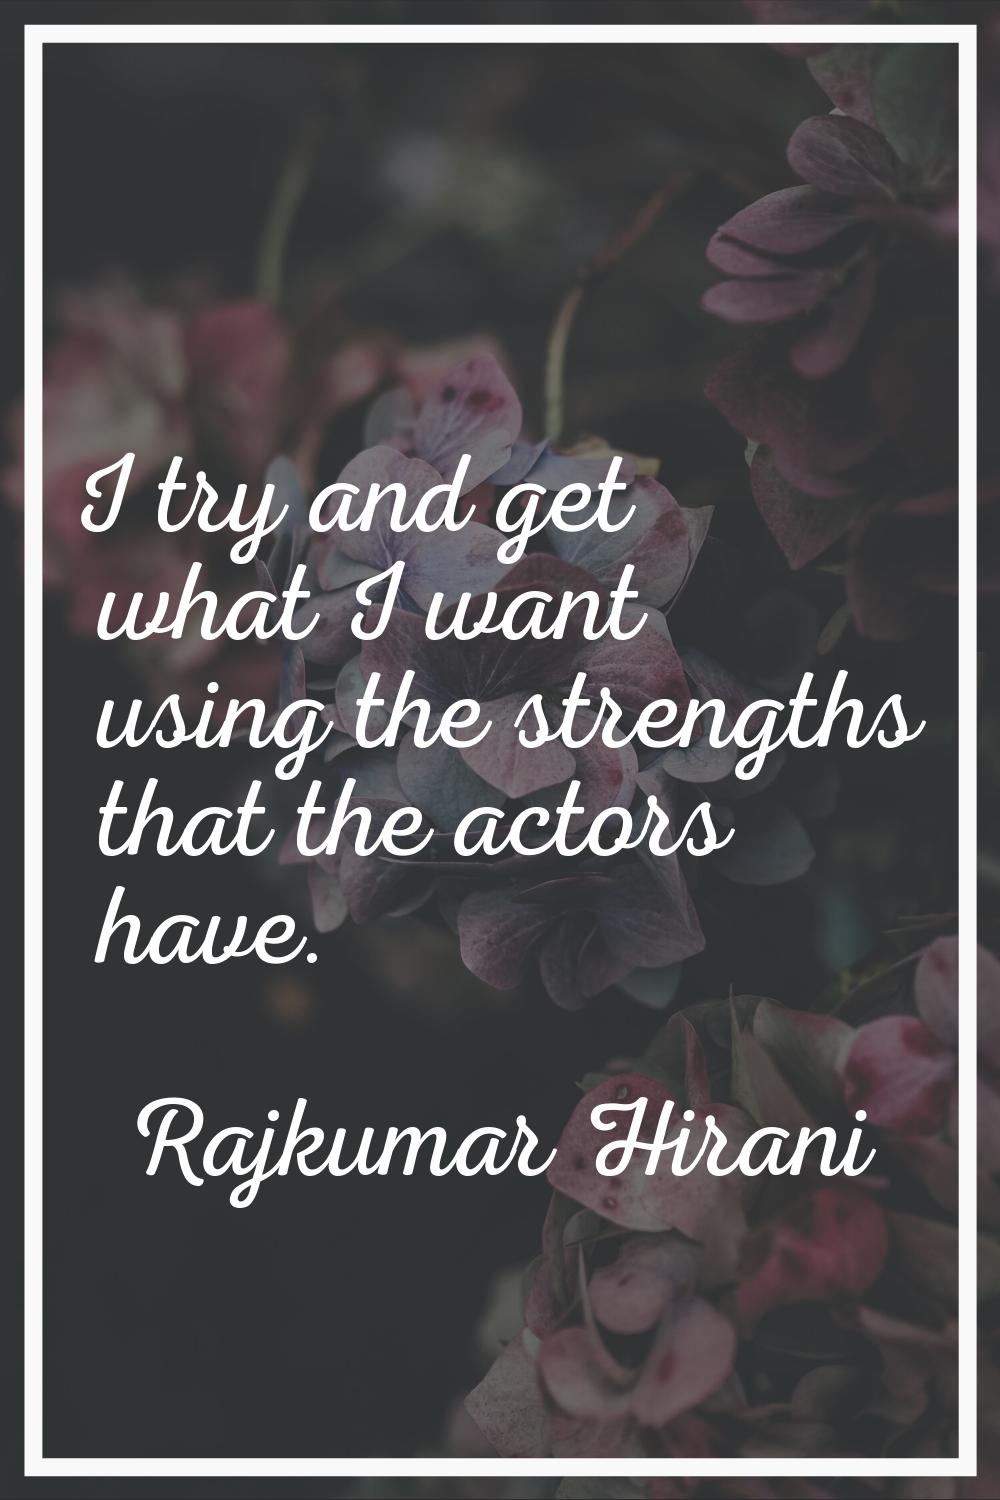 I try and get what I want using the strengths that the actors have.